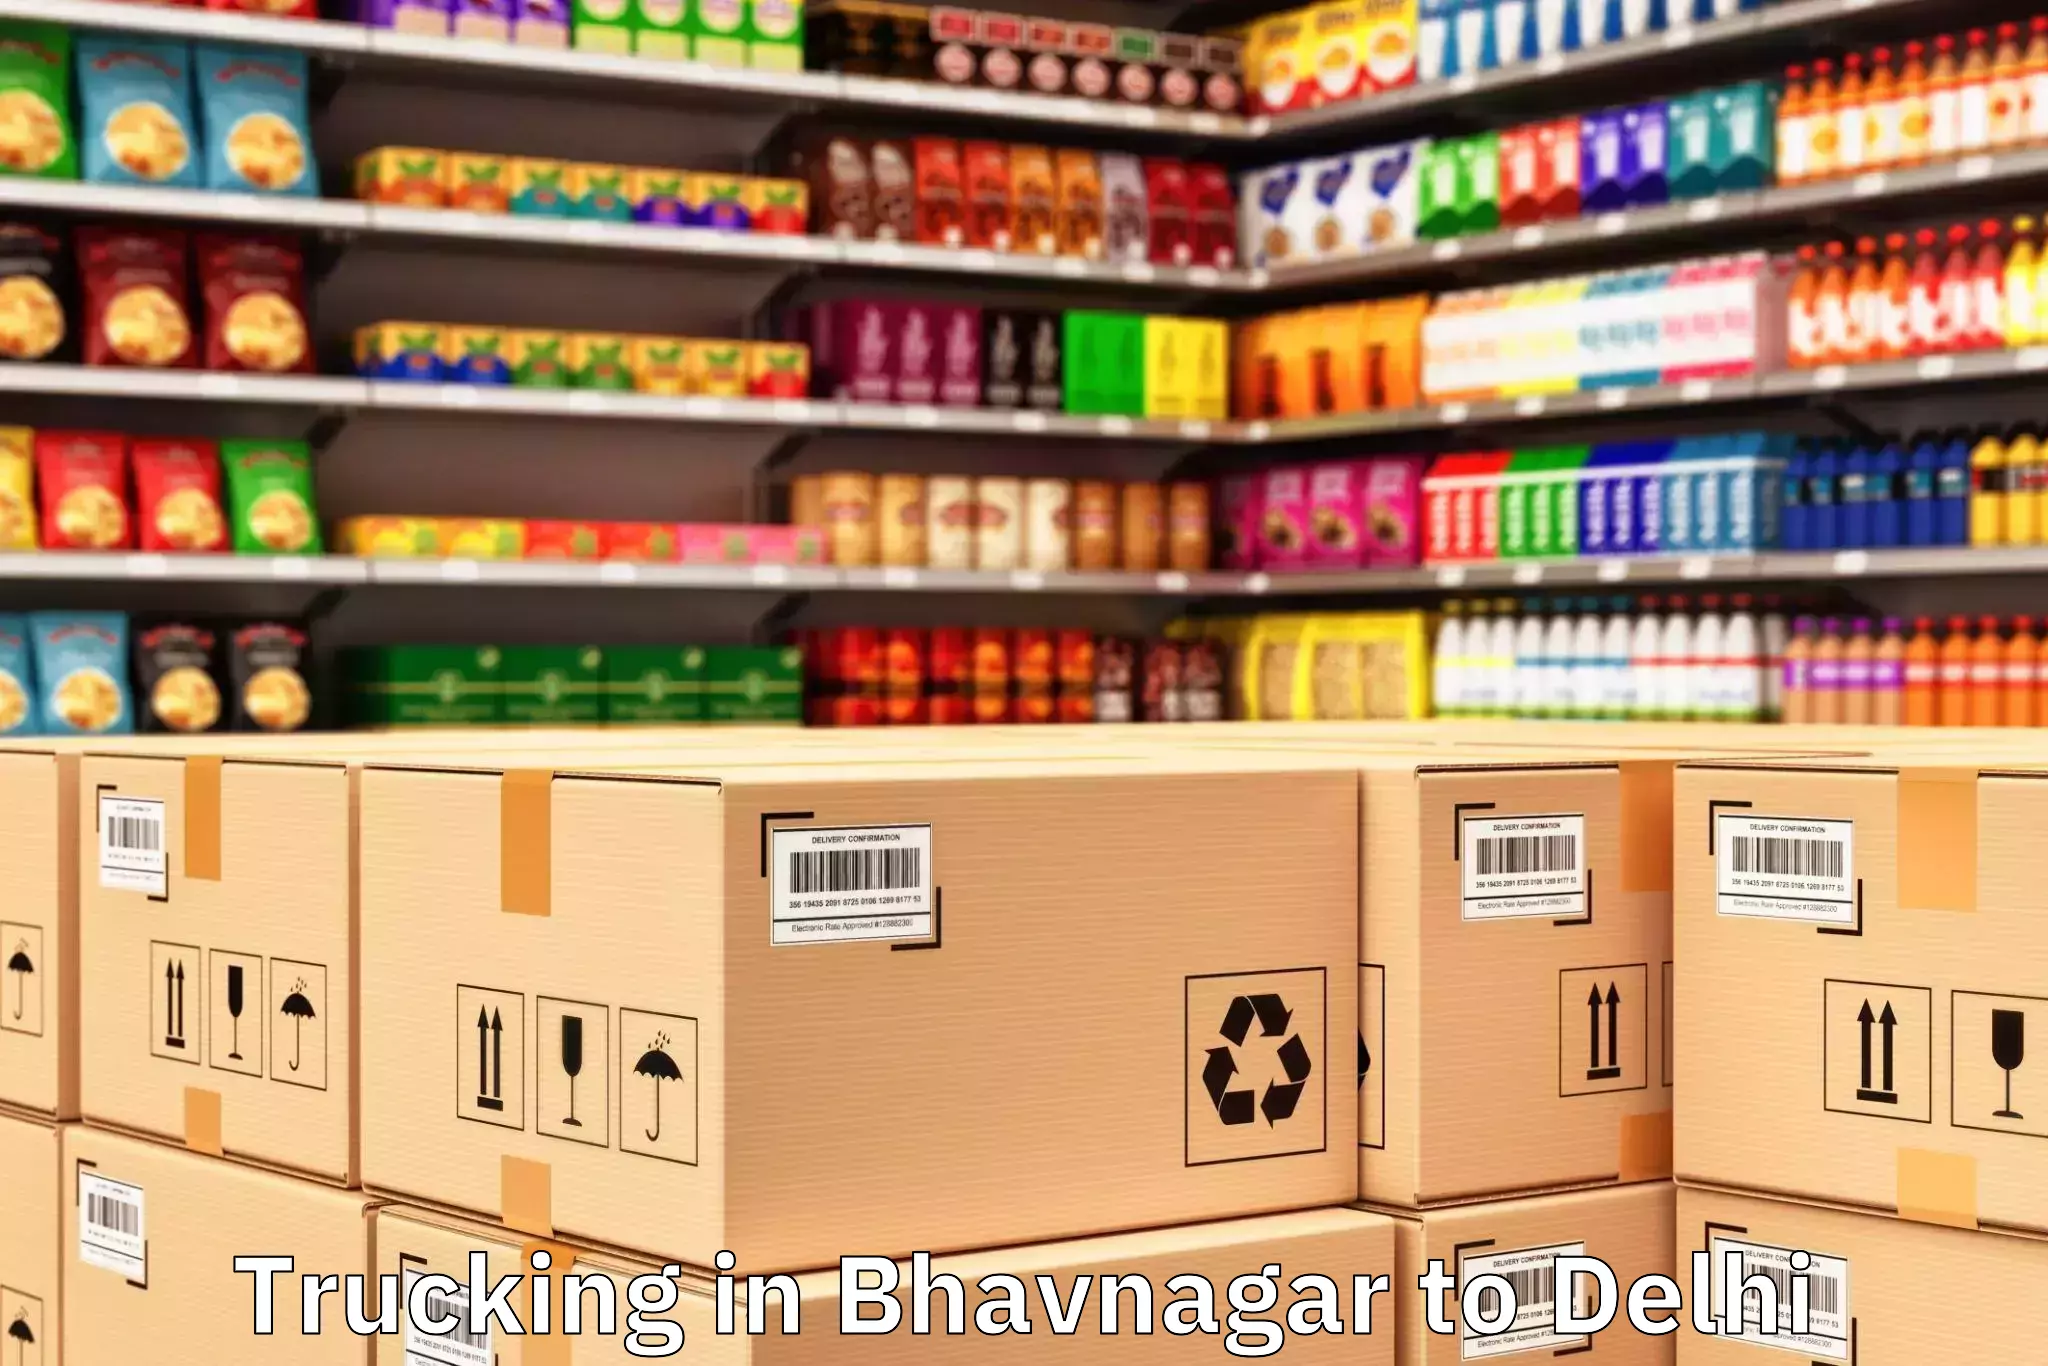 Trusted Bhavnagar to The Indian Law Institute New Delhi Trucking